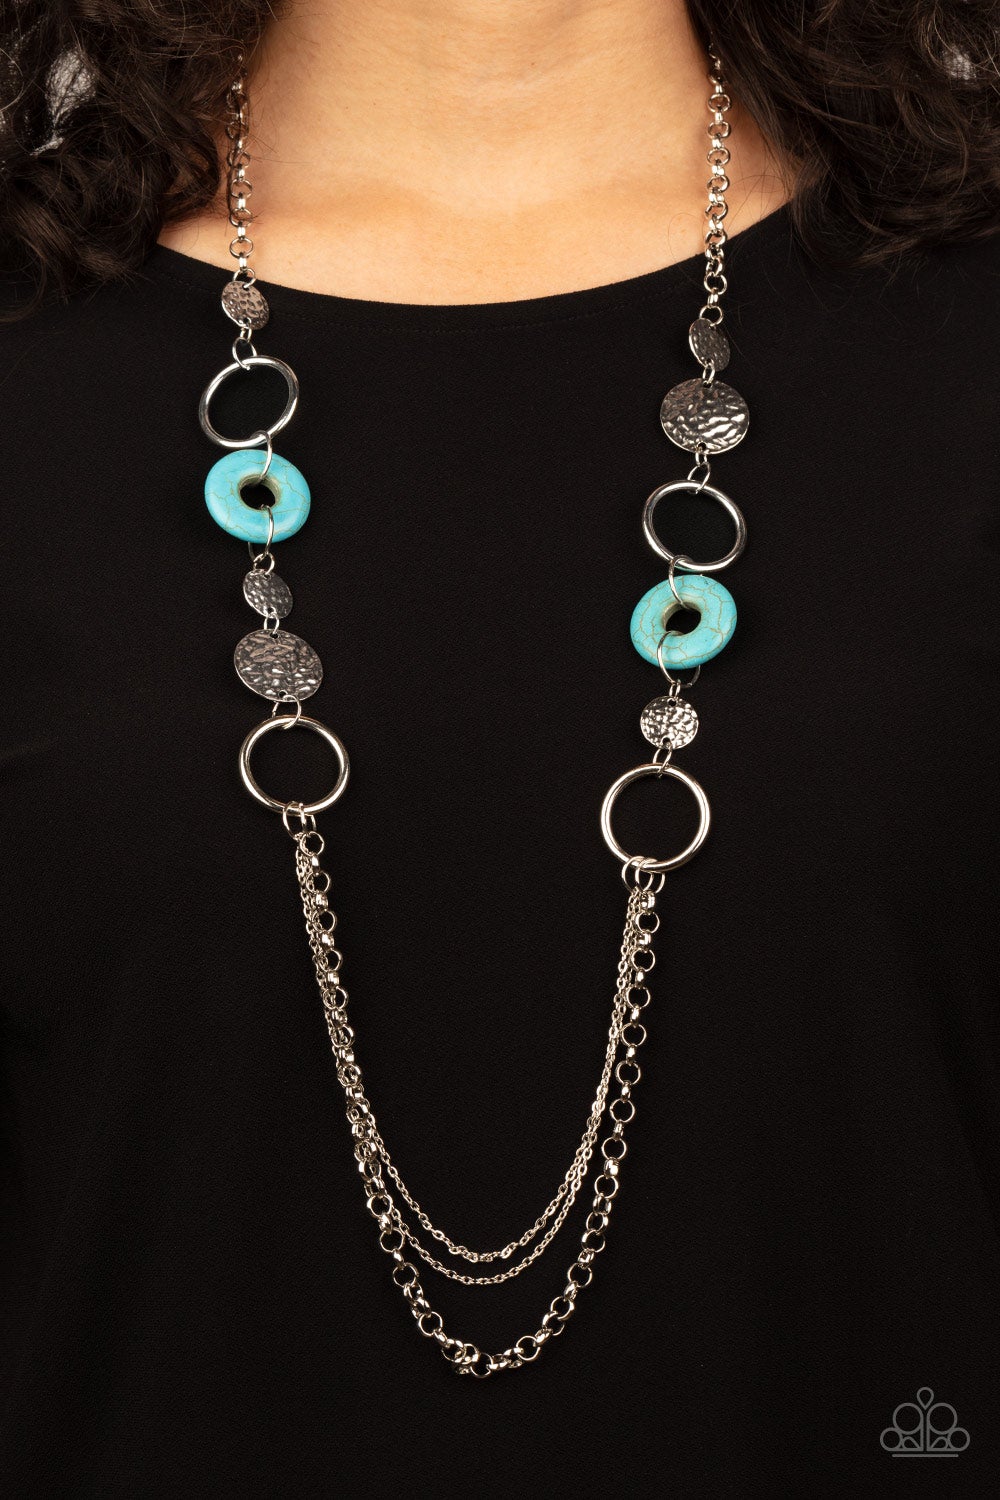 Paparazzi Accessories - Grounded Glamour - Blue ( Turquoise) Necklace